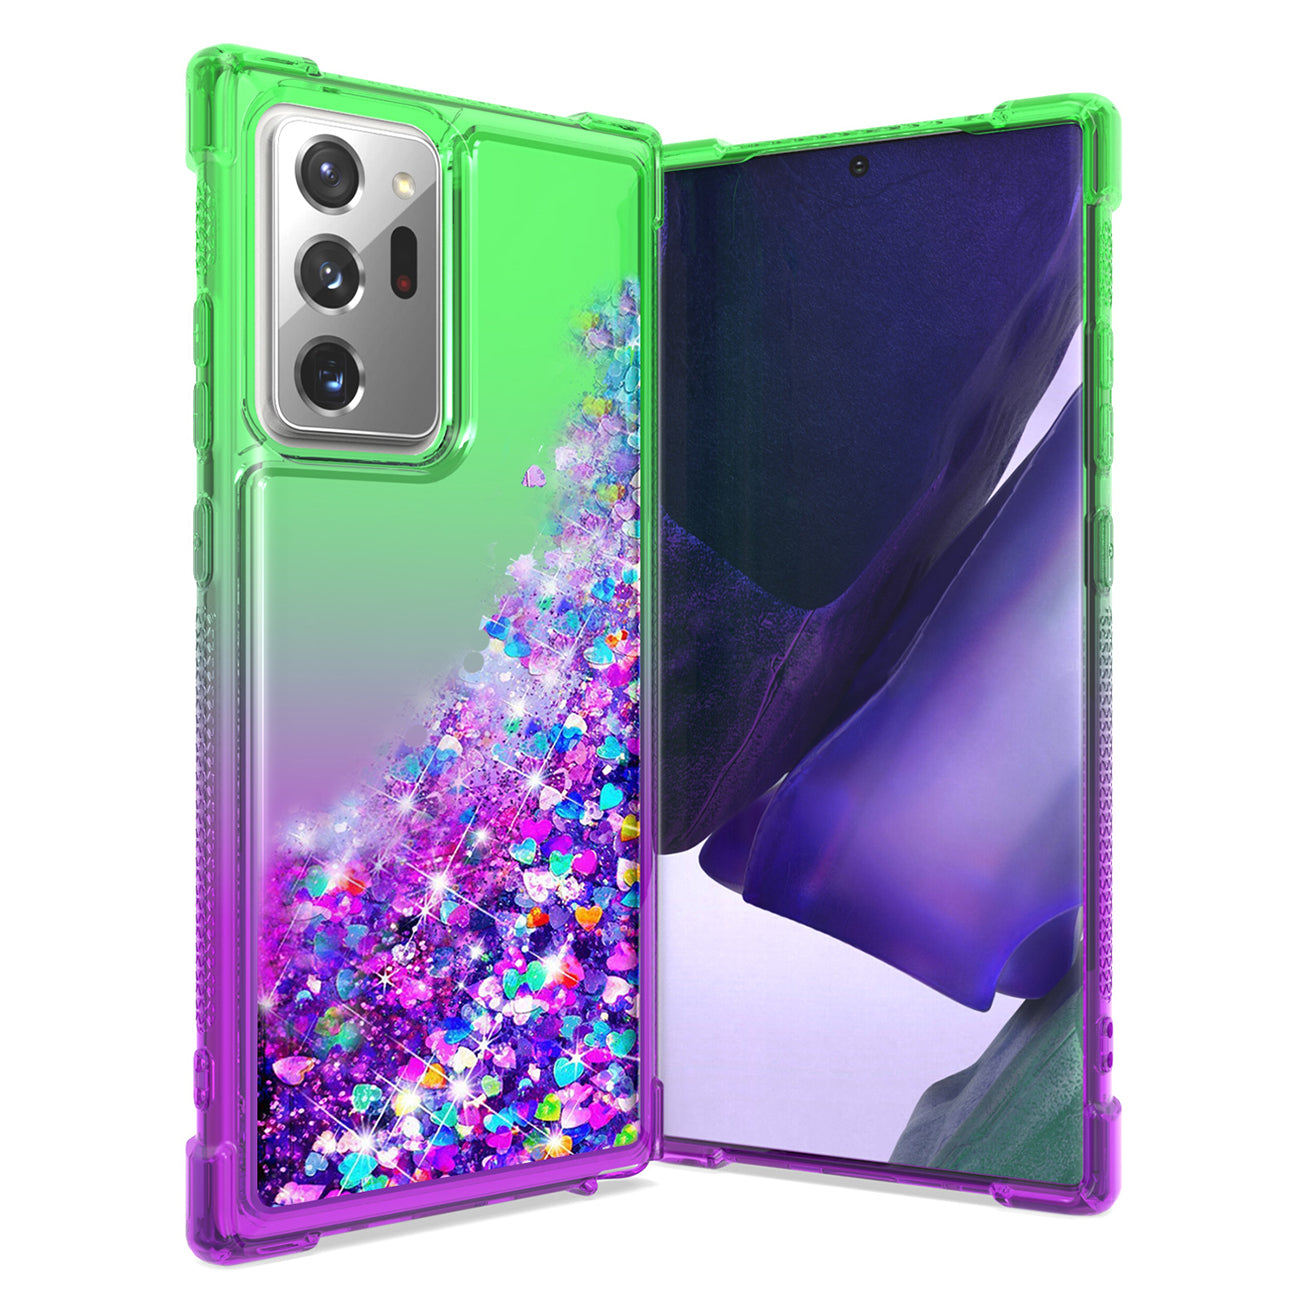 Shiny Flowing Glitter Liquid Bumper Case For SAMSUNG GALAXY NOTE 20 ULTRA In Green